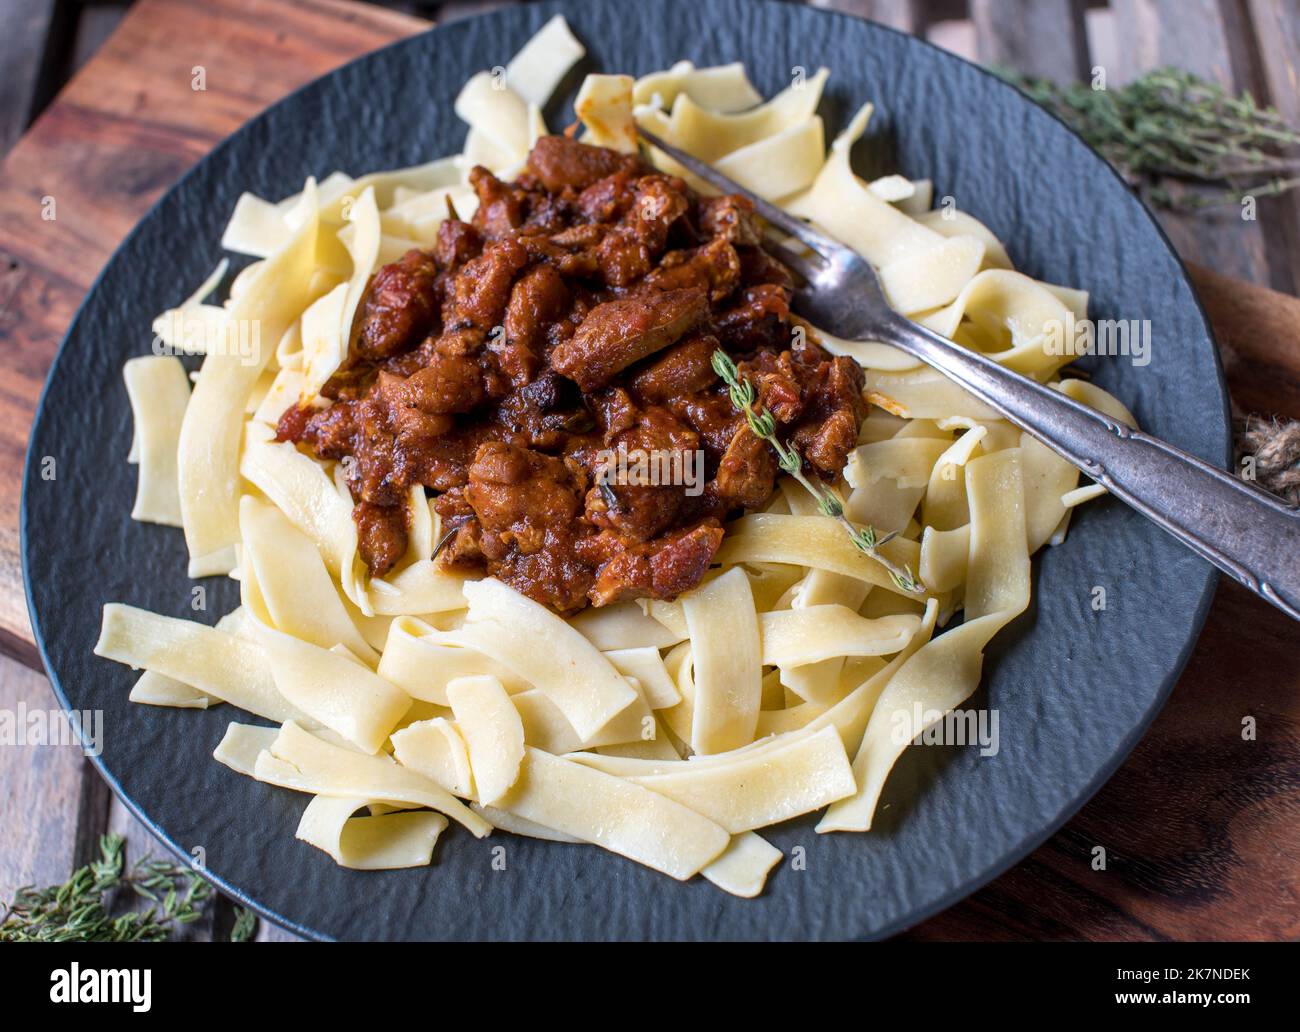 Brown stew chicken with tagliatelle on a plate. Italian cuisine Stock Photo